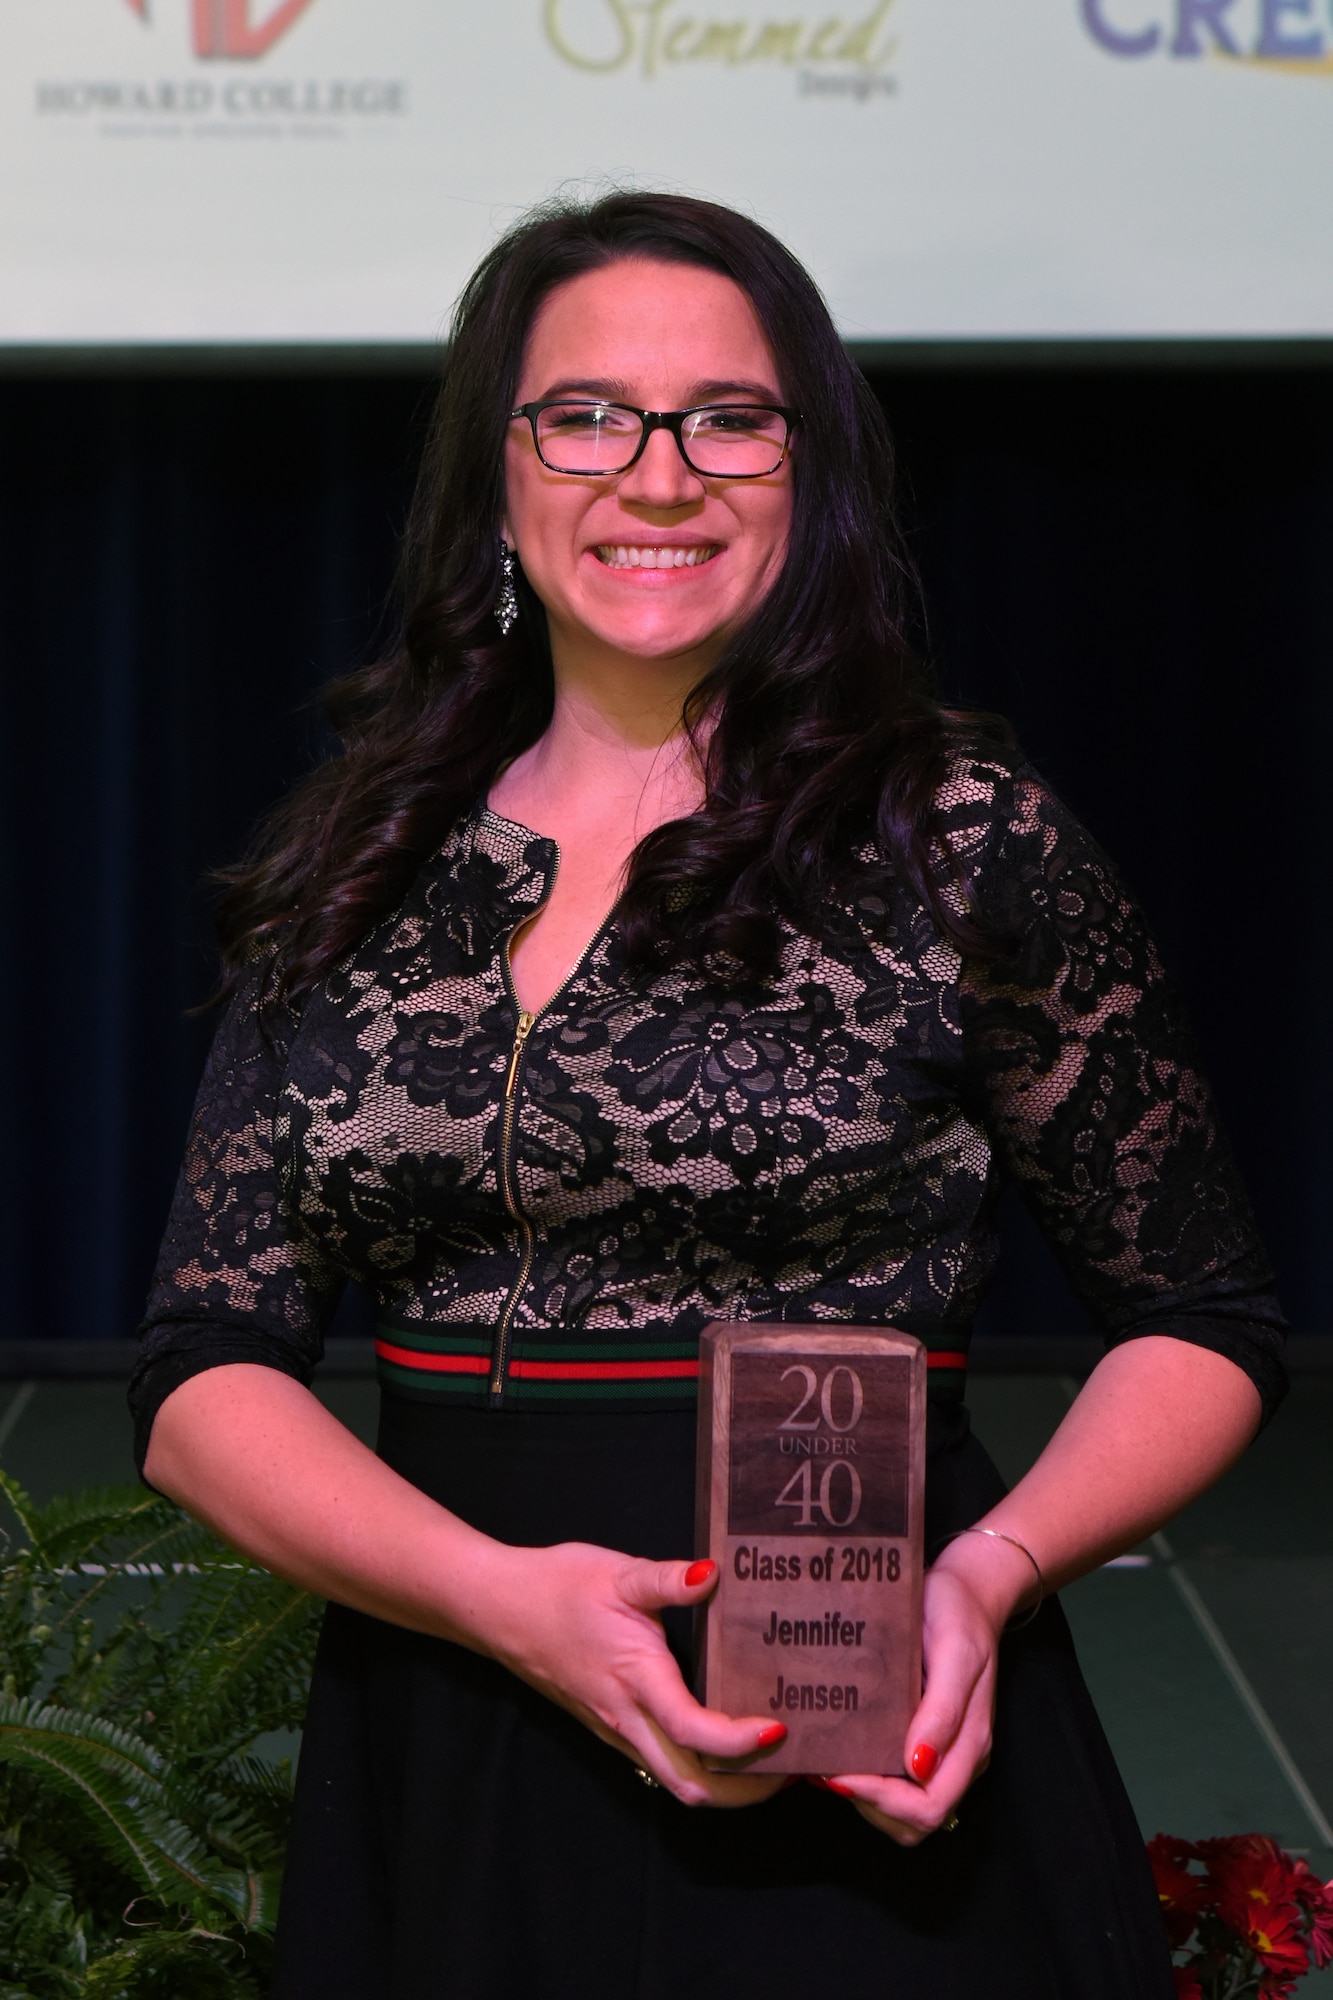 Jennifer Jensen, one of two Goodfellow spouses awarded, poses with her award after being recognized as one of San Angelo’s “20 under 40” at the C.J. Davidson Conference Center in San Angelo, Texas, Nov. 30, 2018. Jensen works at West Texas Counseling and Guidance using her experience as an Air Force veteran to be able to better help those in the community. (U.S. Air Force photo by Airman 1st Class Zachary Chapman/Released)